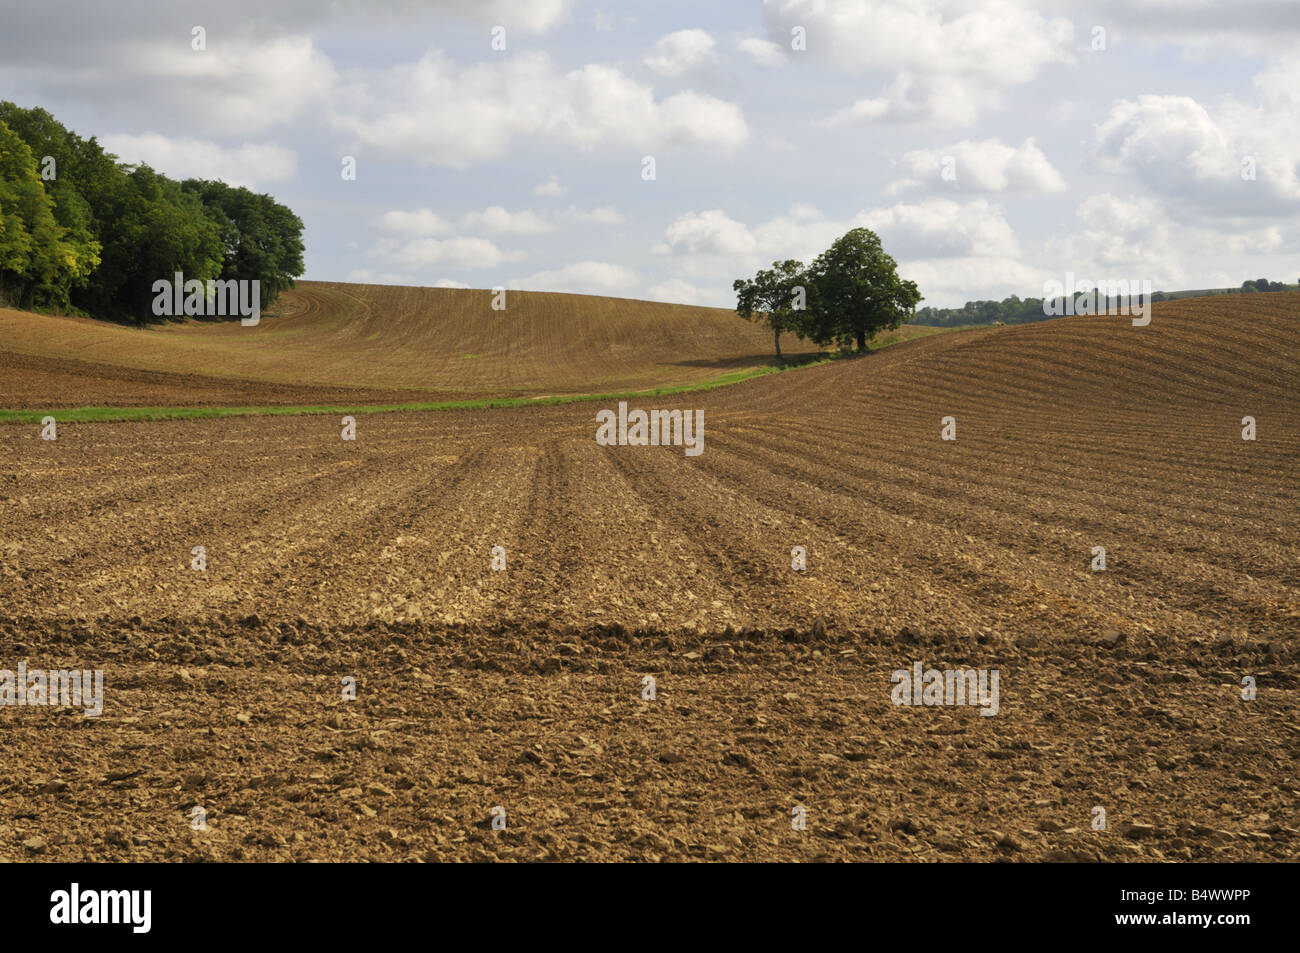 Autumn scene of ploughed field in Northern France. Stock Photo